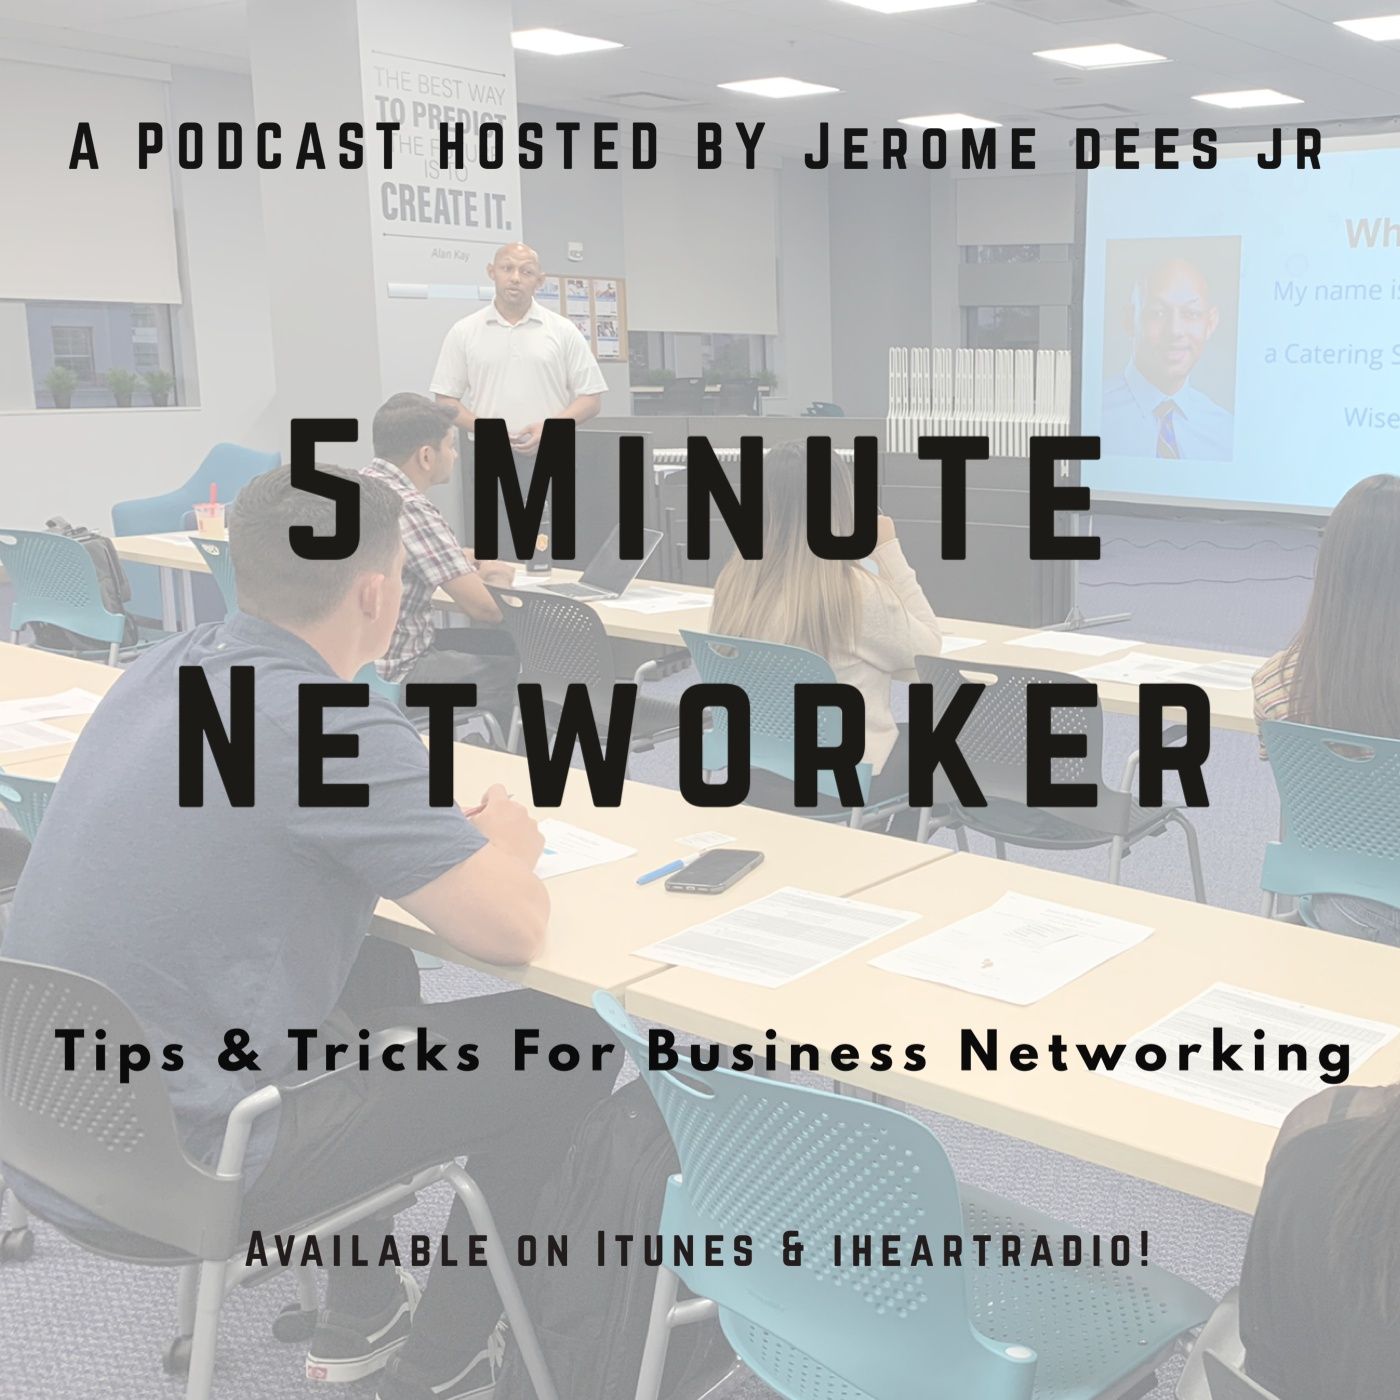 CaterUP2019, 82% Micro Business Summit & A Great LinkedIn Tip For Networking!